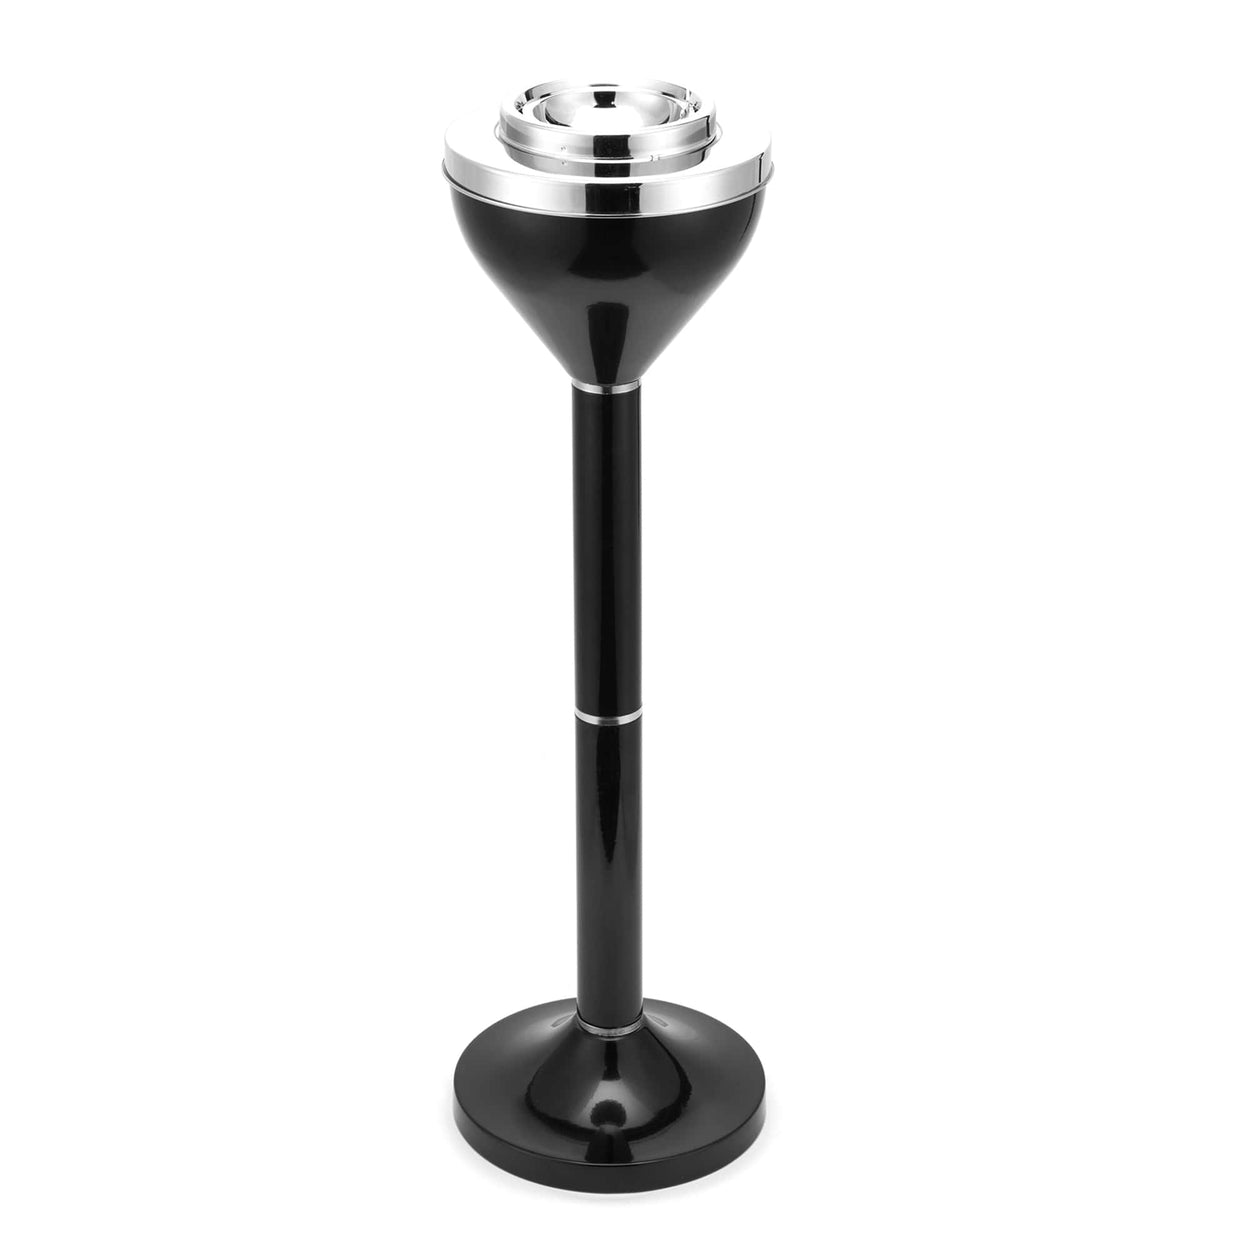 CO-Z black outdoor ashtray stand with Lid